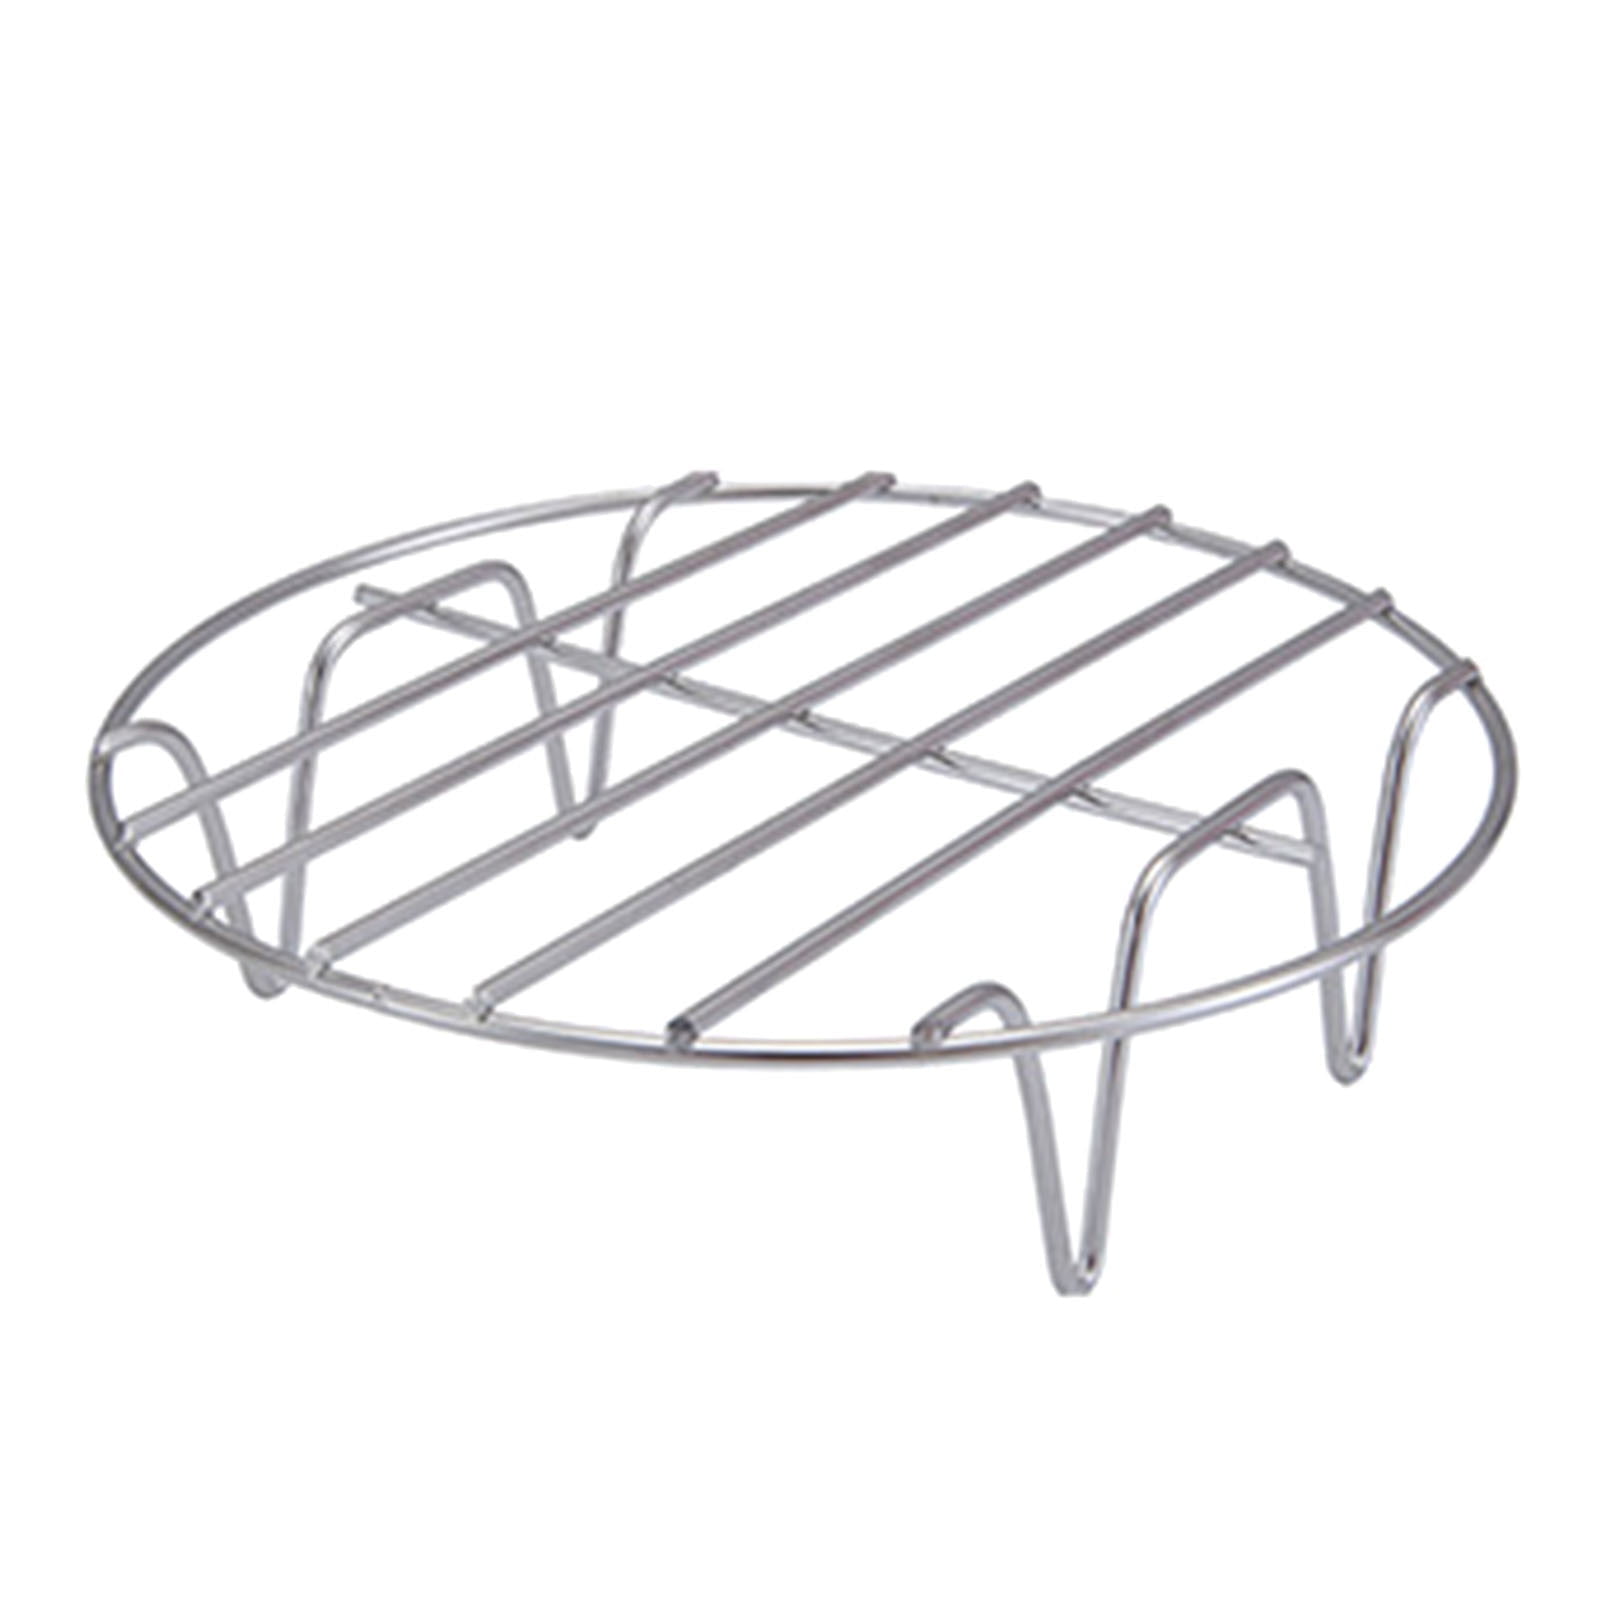 Air Fryer Accessory Rack With Skewer Stainless Steel BBQ Grill Baking  Cooling Steaming Rack Pan Diameter 16/17.8/18/20/22 CM - Buy Air Fryer  Accessory Rack With Skewer Stainless Steel BBQ Grill Baking Cooling